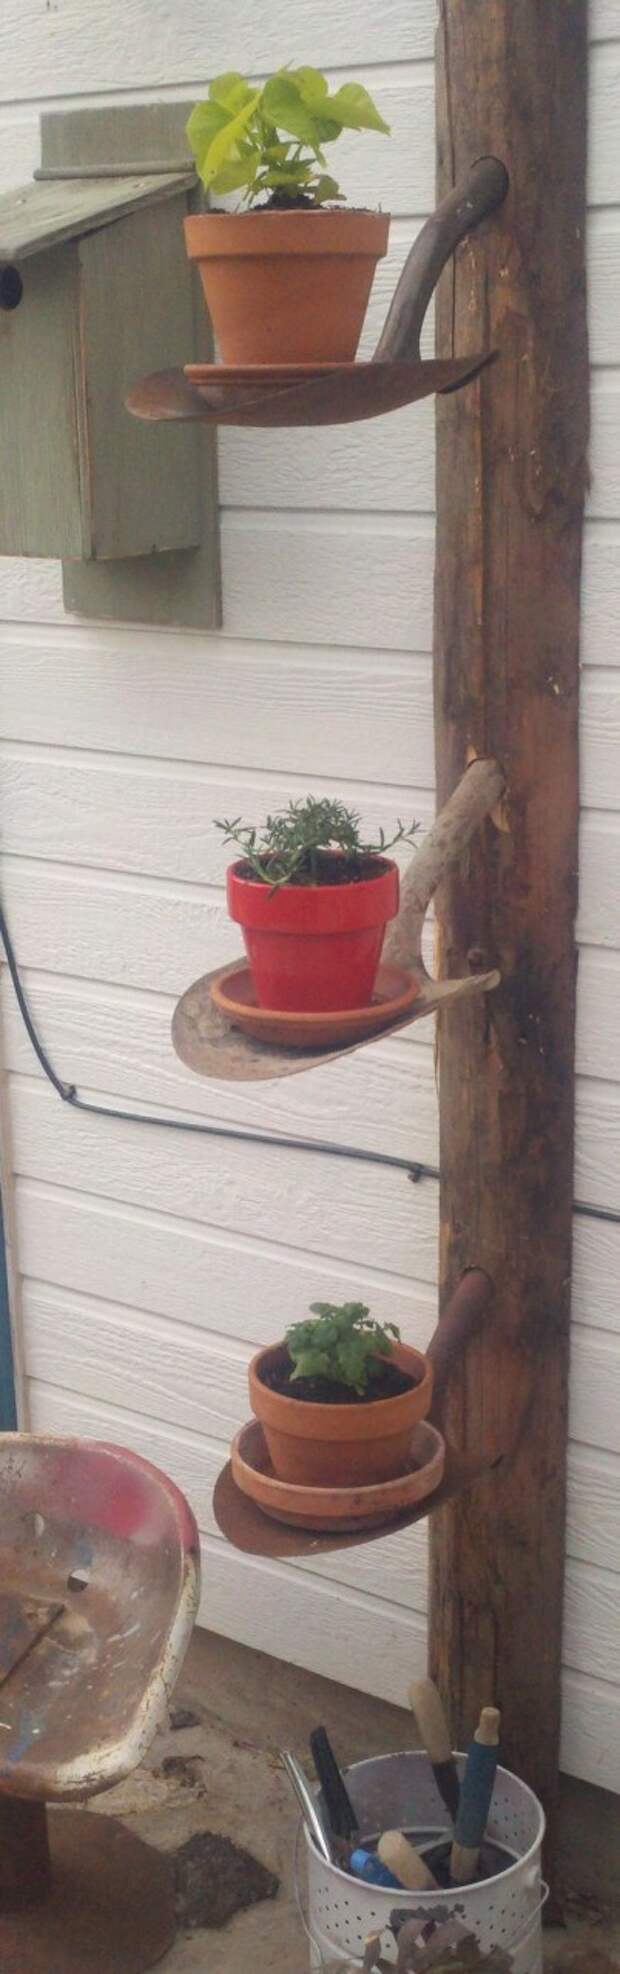 Old post + old shovel heads = rustic garden shelves.  Would look great with hanging flower baskets.: 